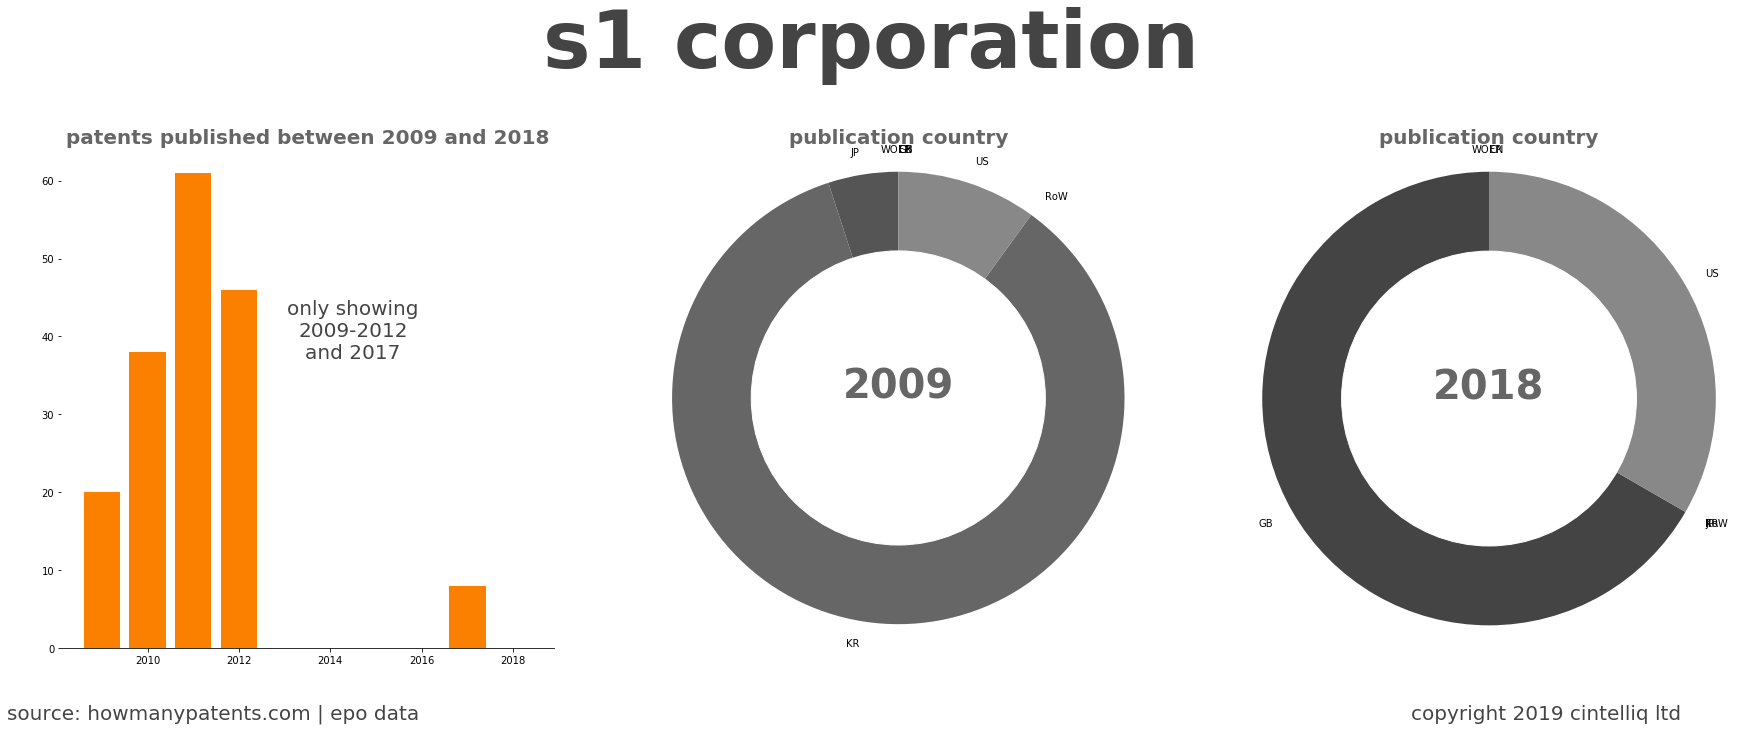 summary of patents for S1 Corporation